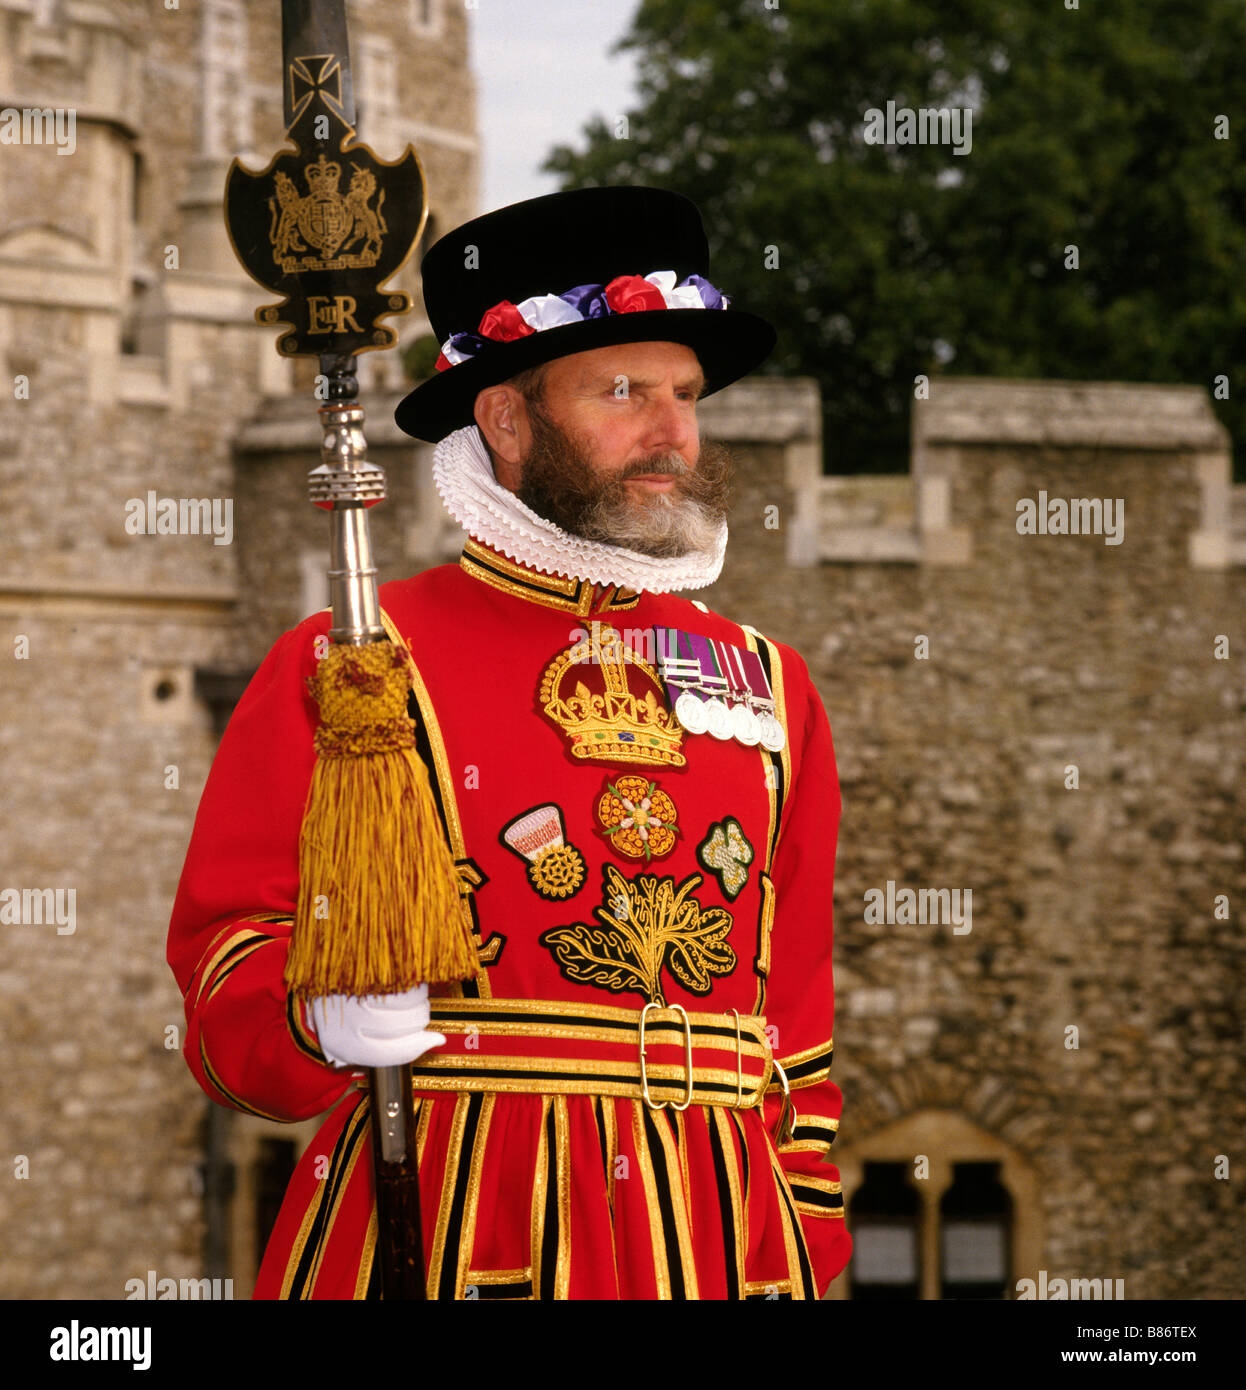 Beefeater Guard at the Tower of London UK Stock Photo